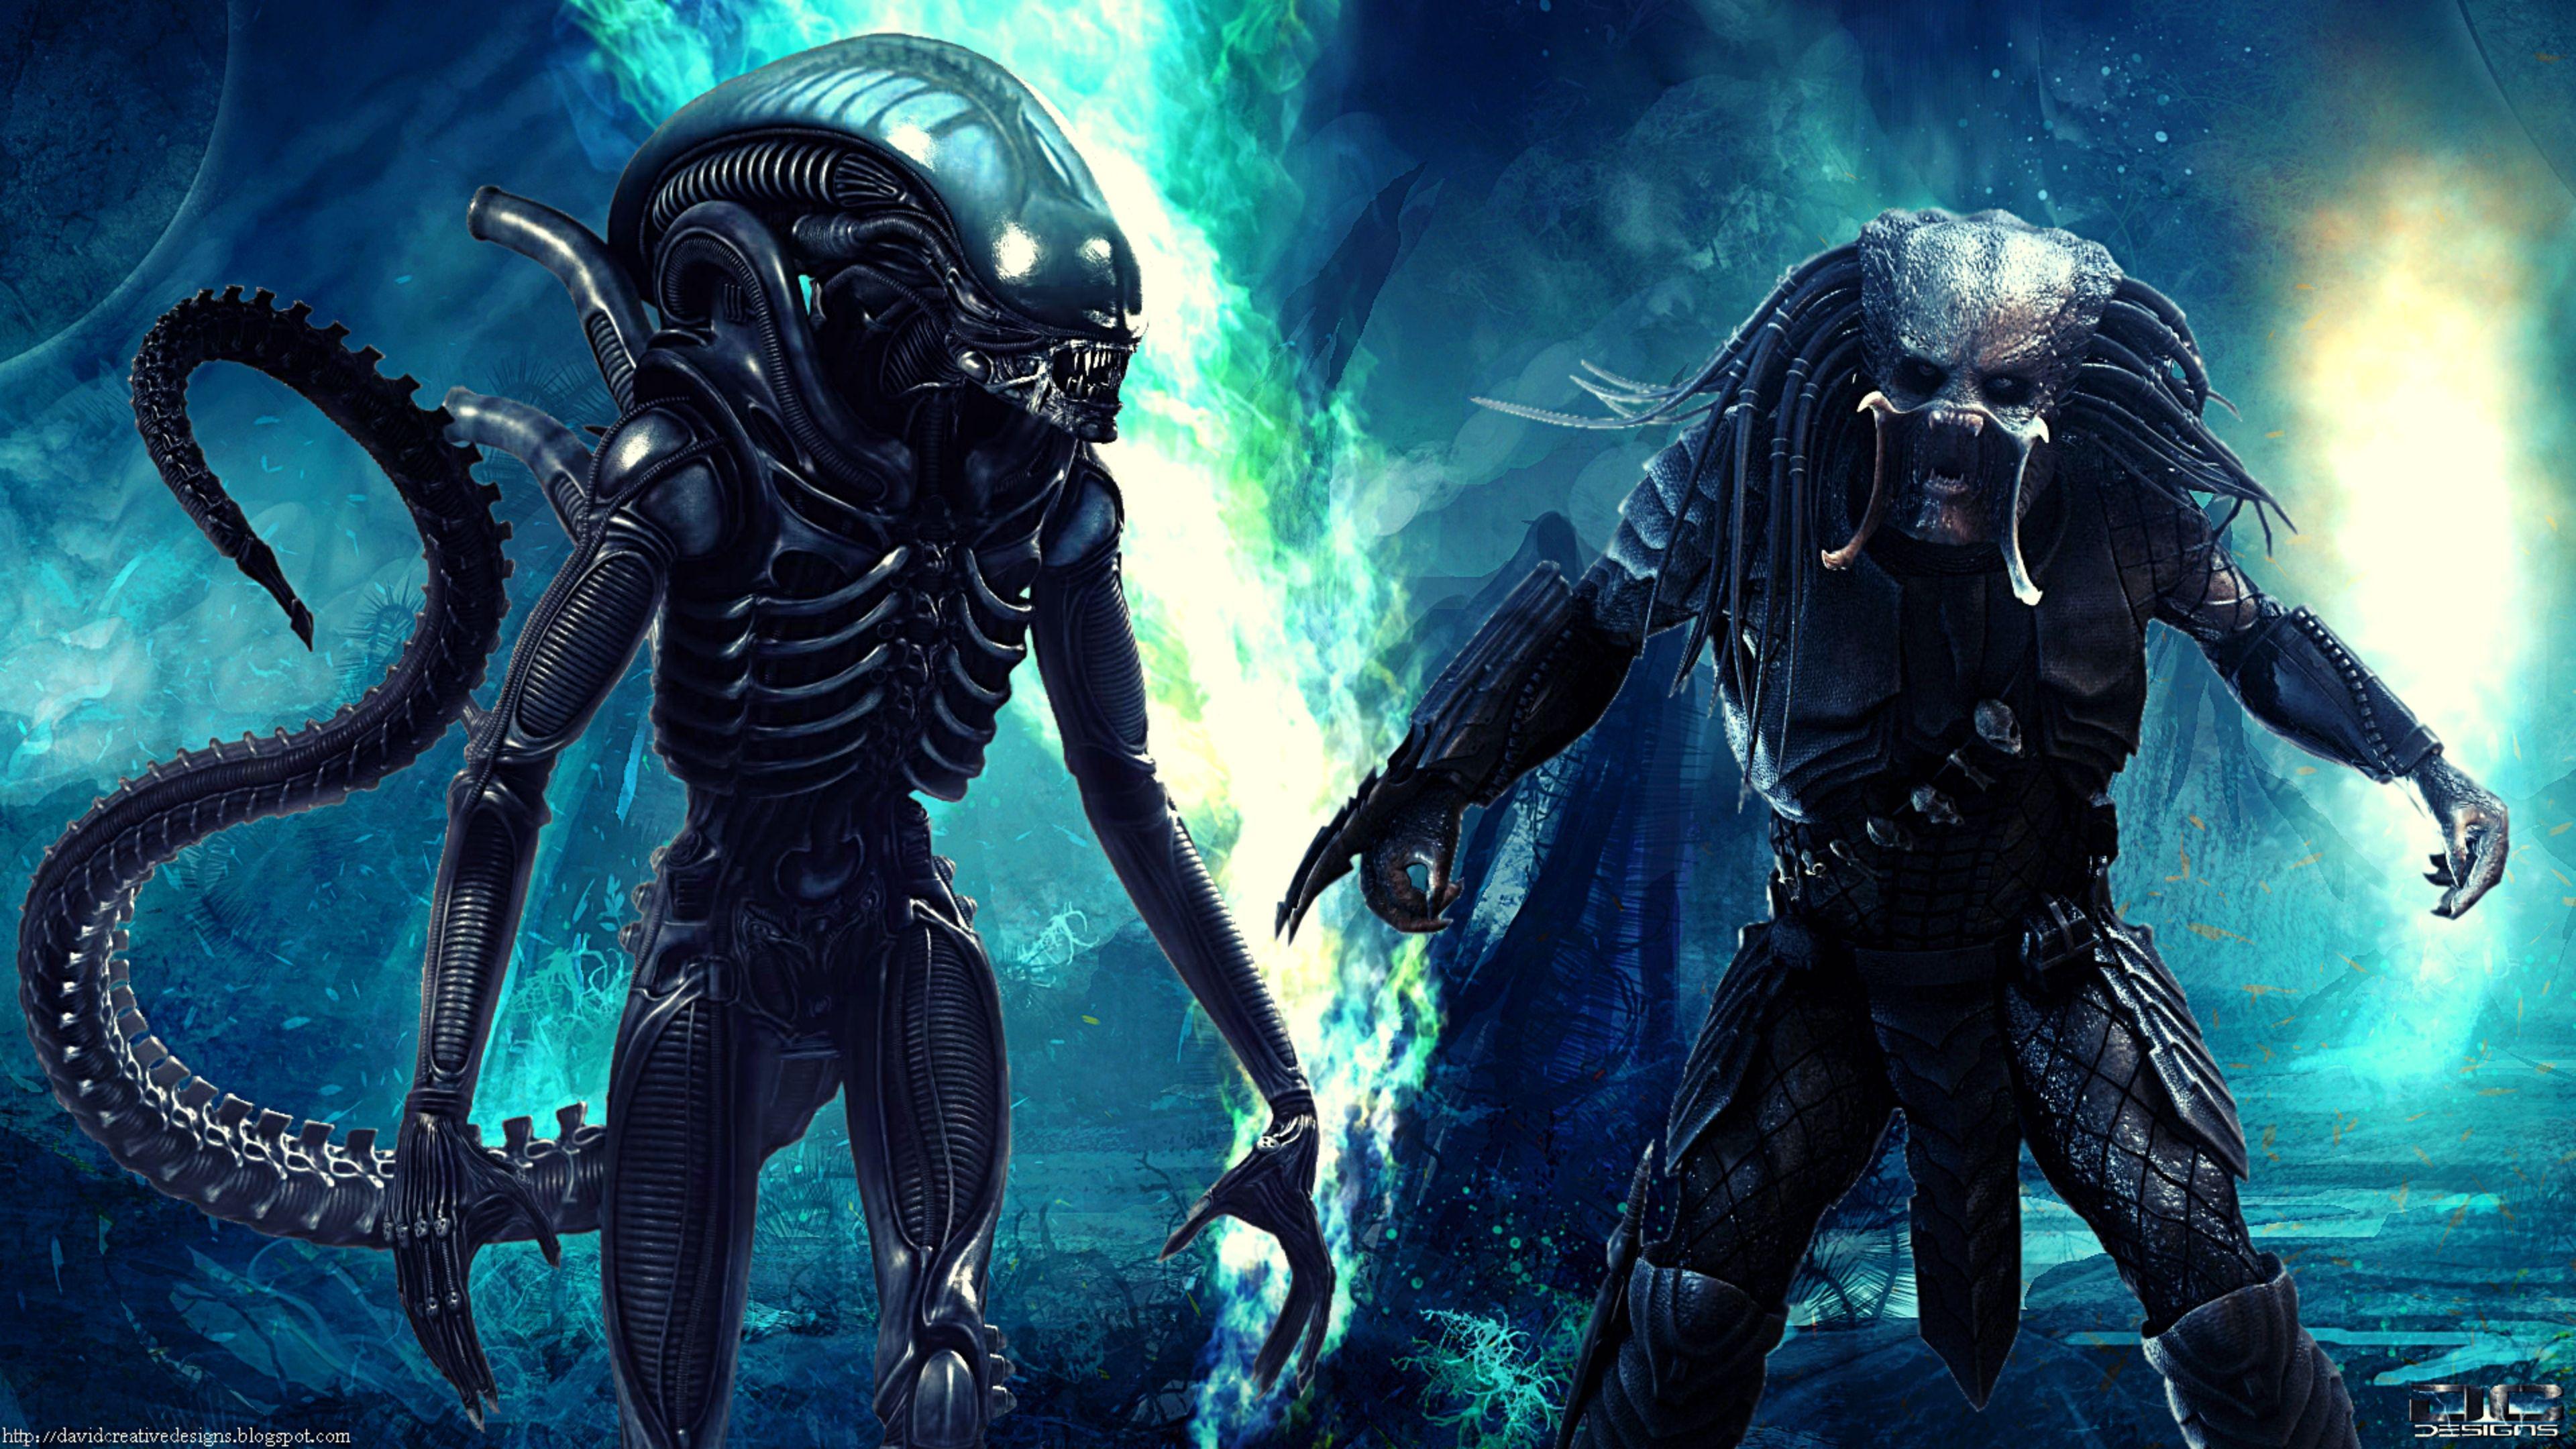 Predator 4K wallpaper for your desktop or mobile screen free and easy to download